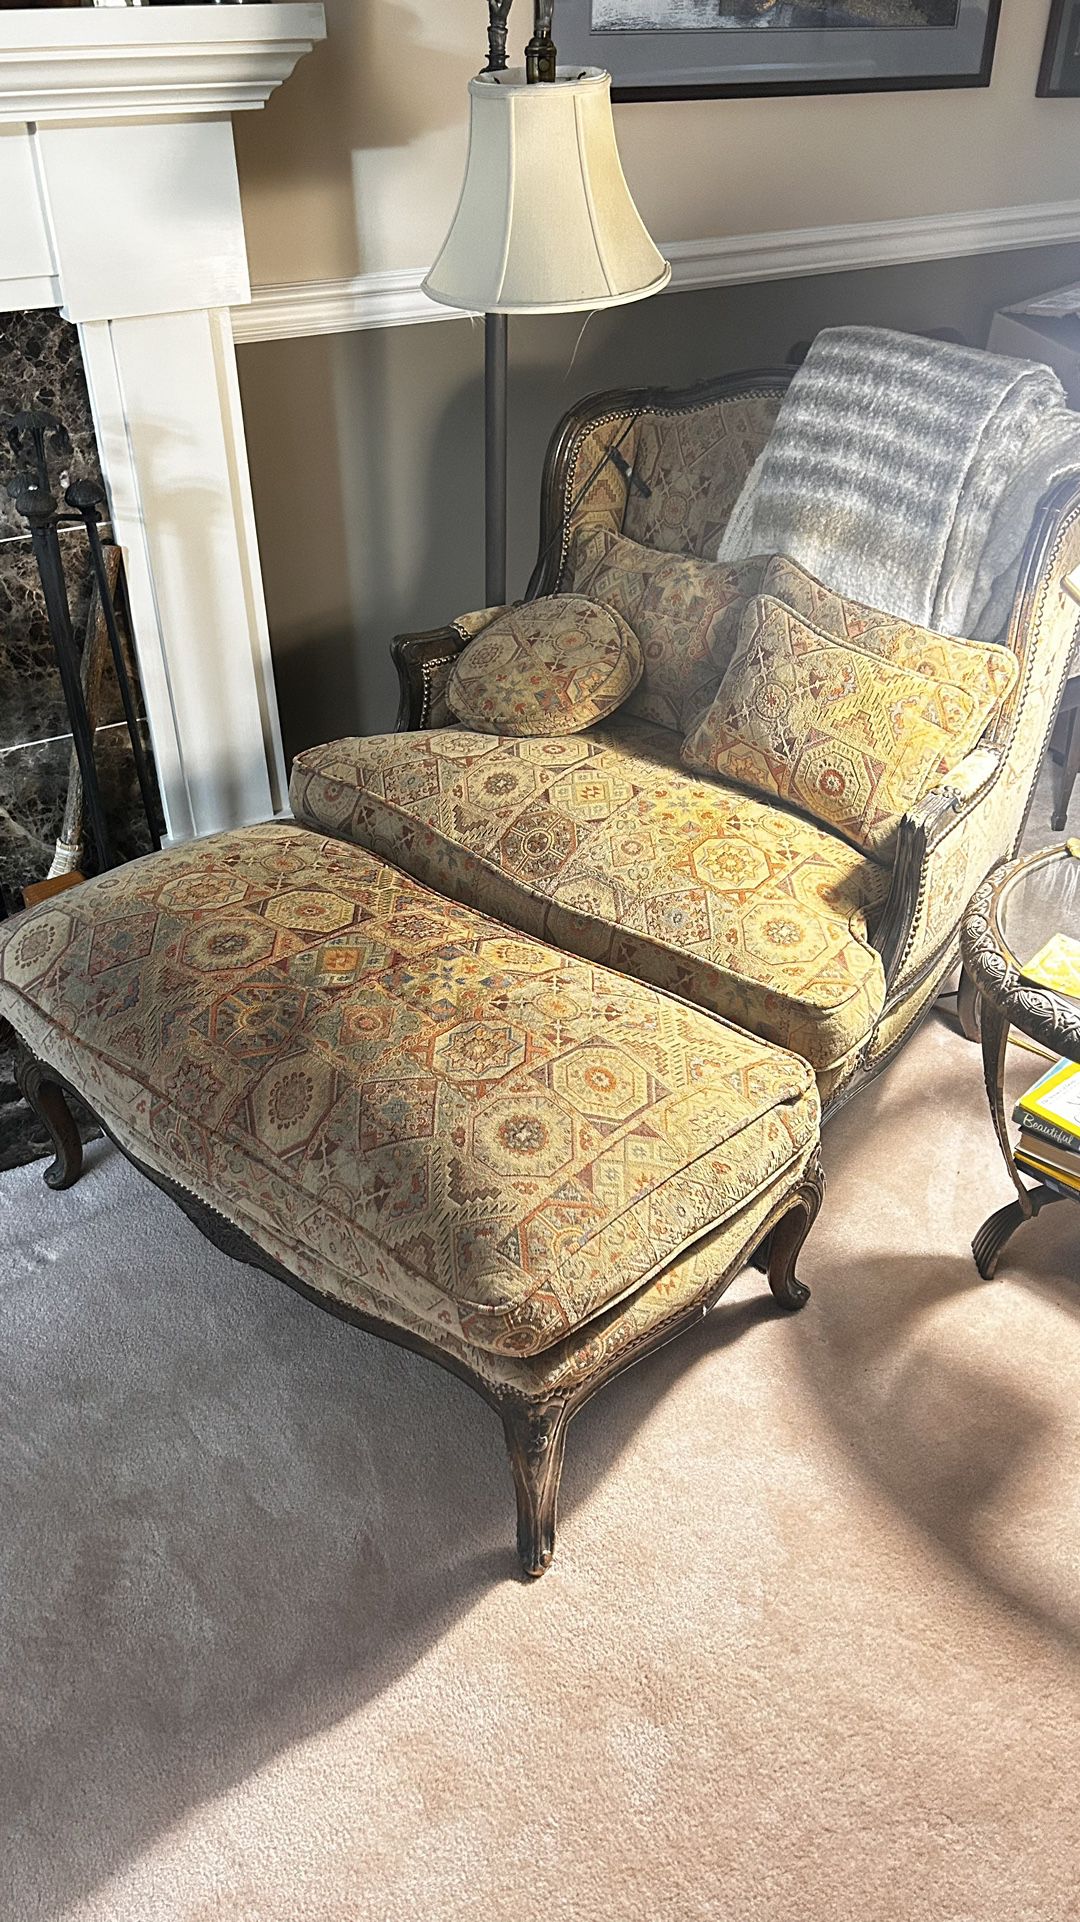 Antique Chair With Matching Ottoman 